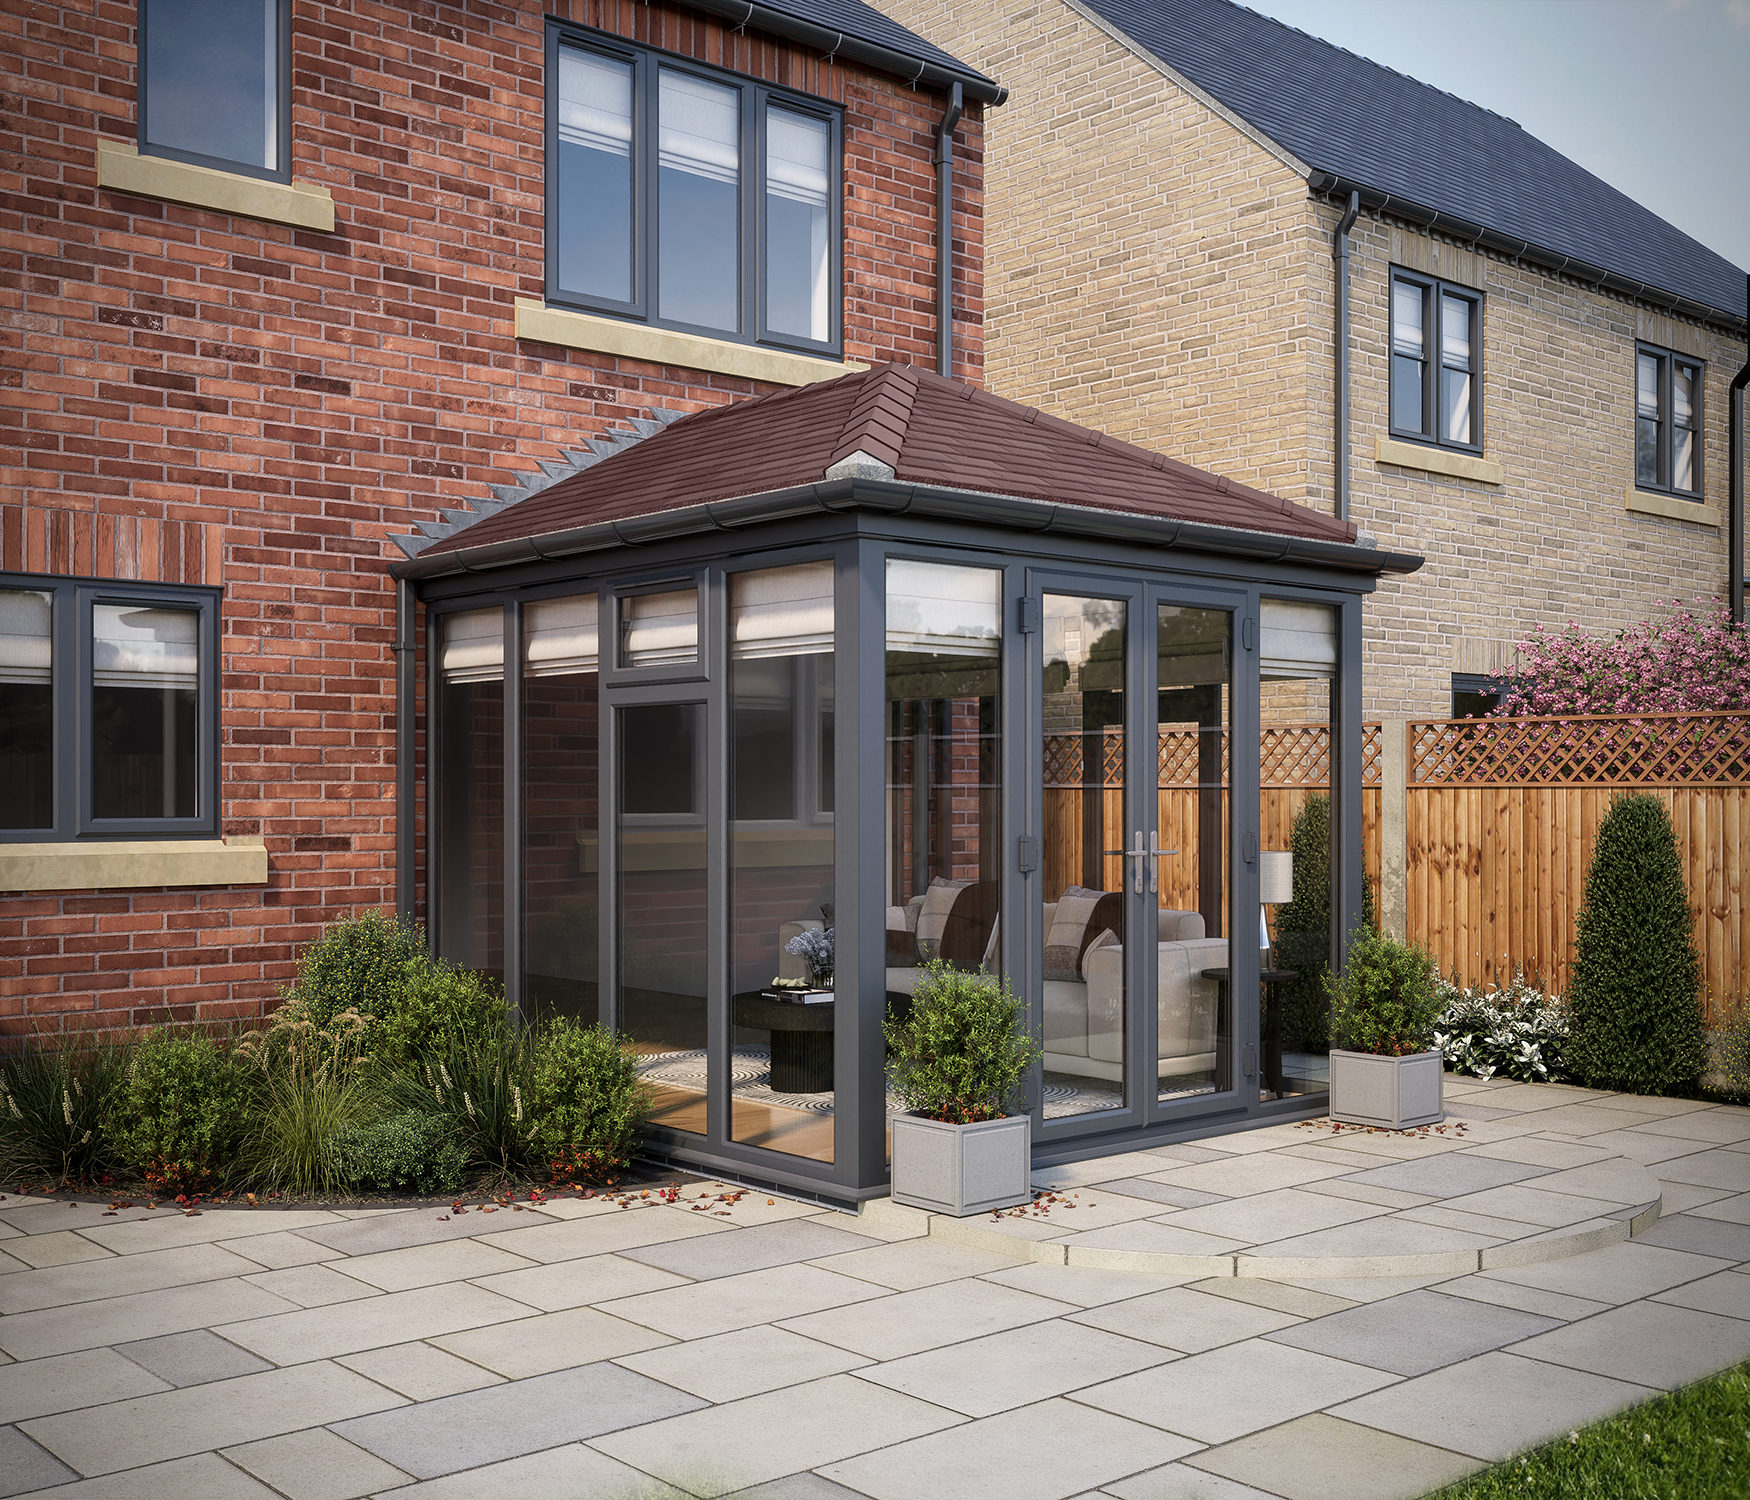 SOLid roof Full height Edwardian Conservatory Grey Frames with Rustic Brown Tiles